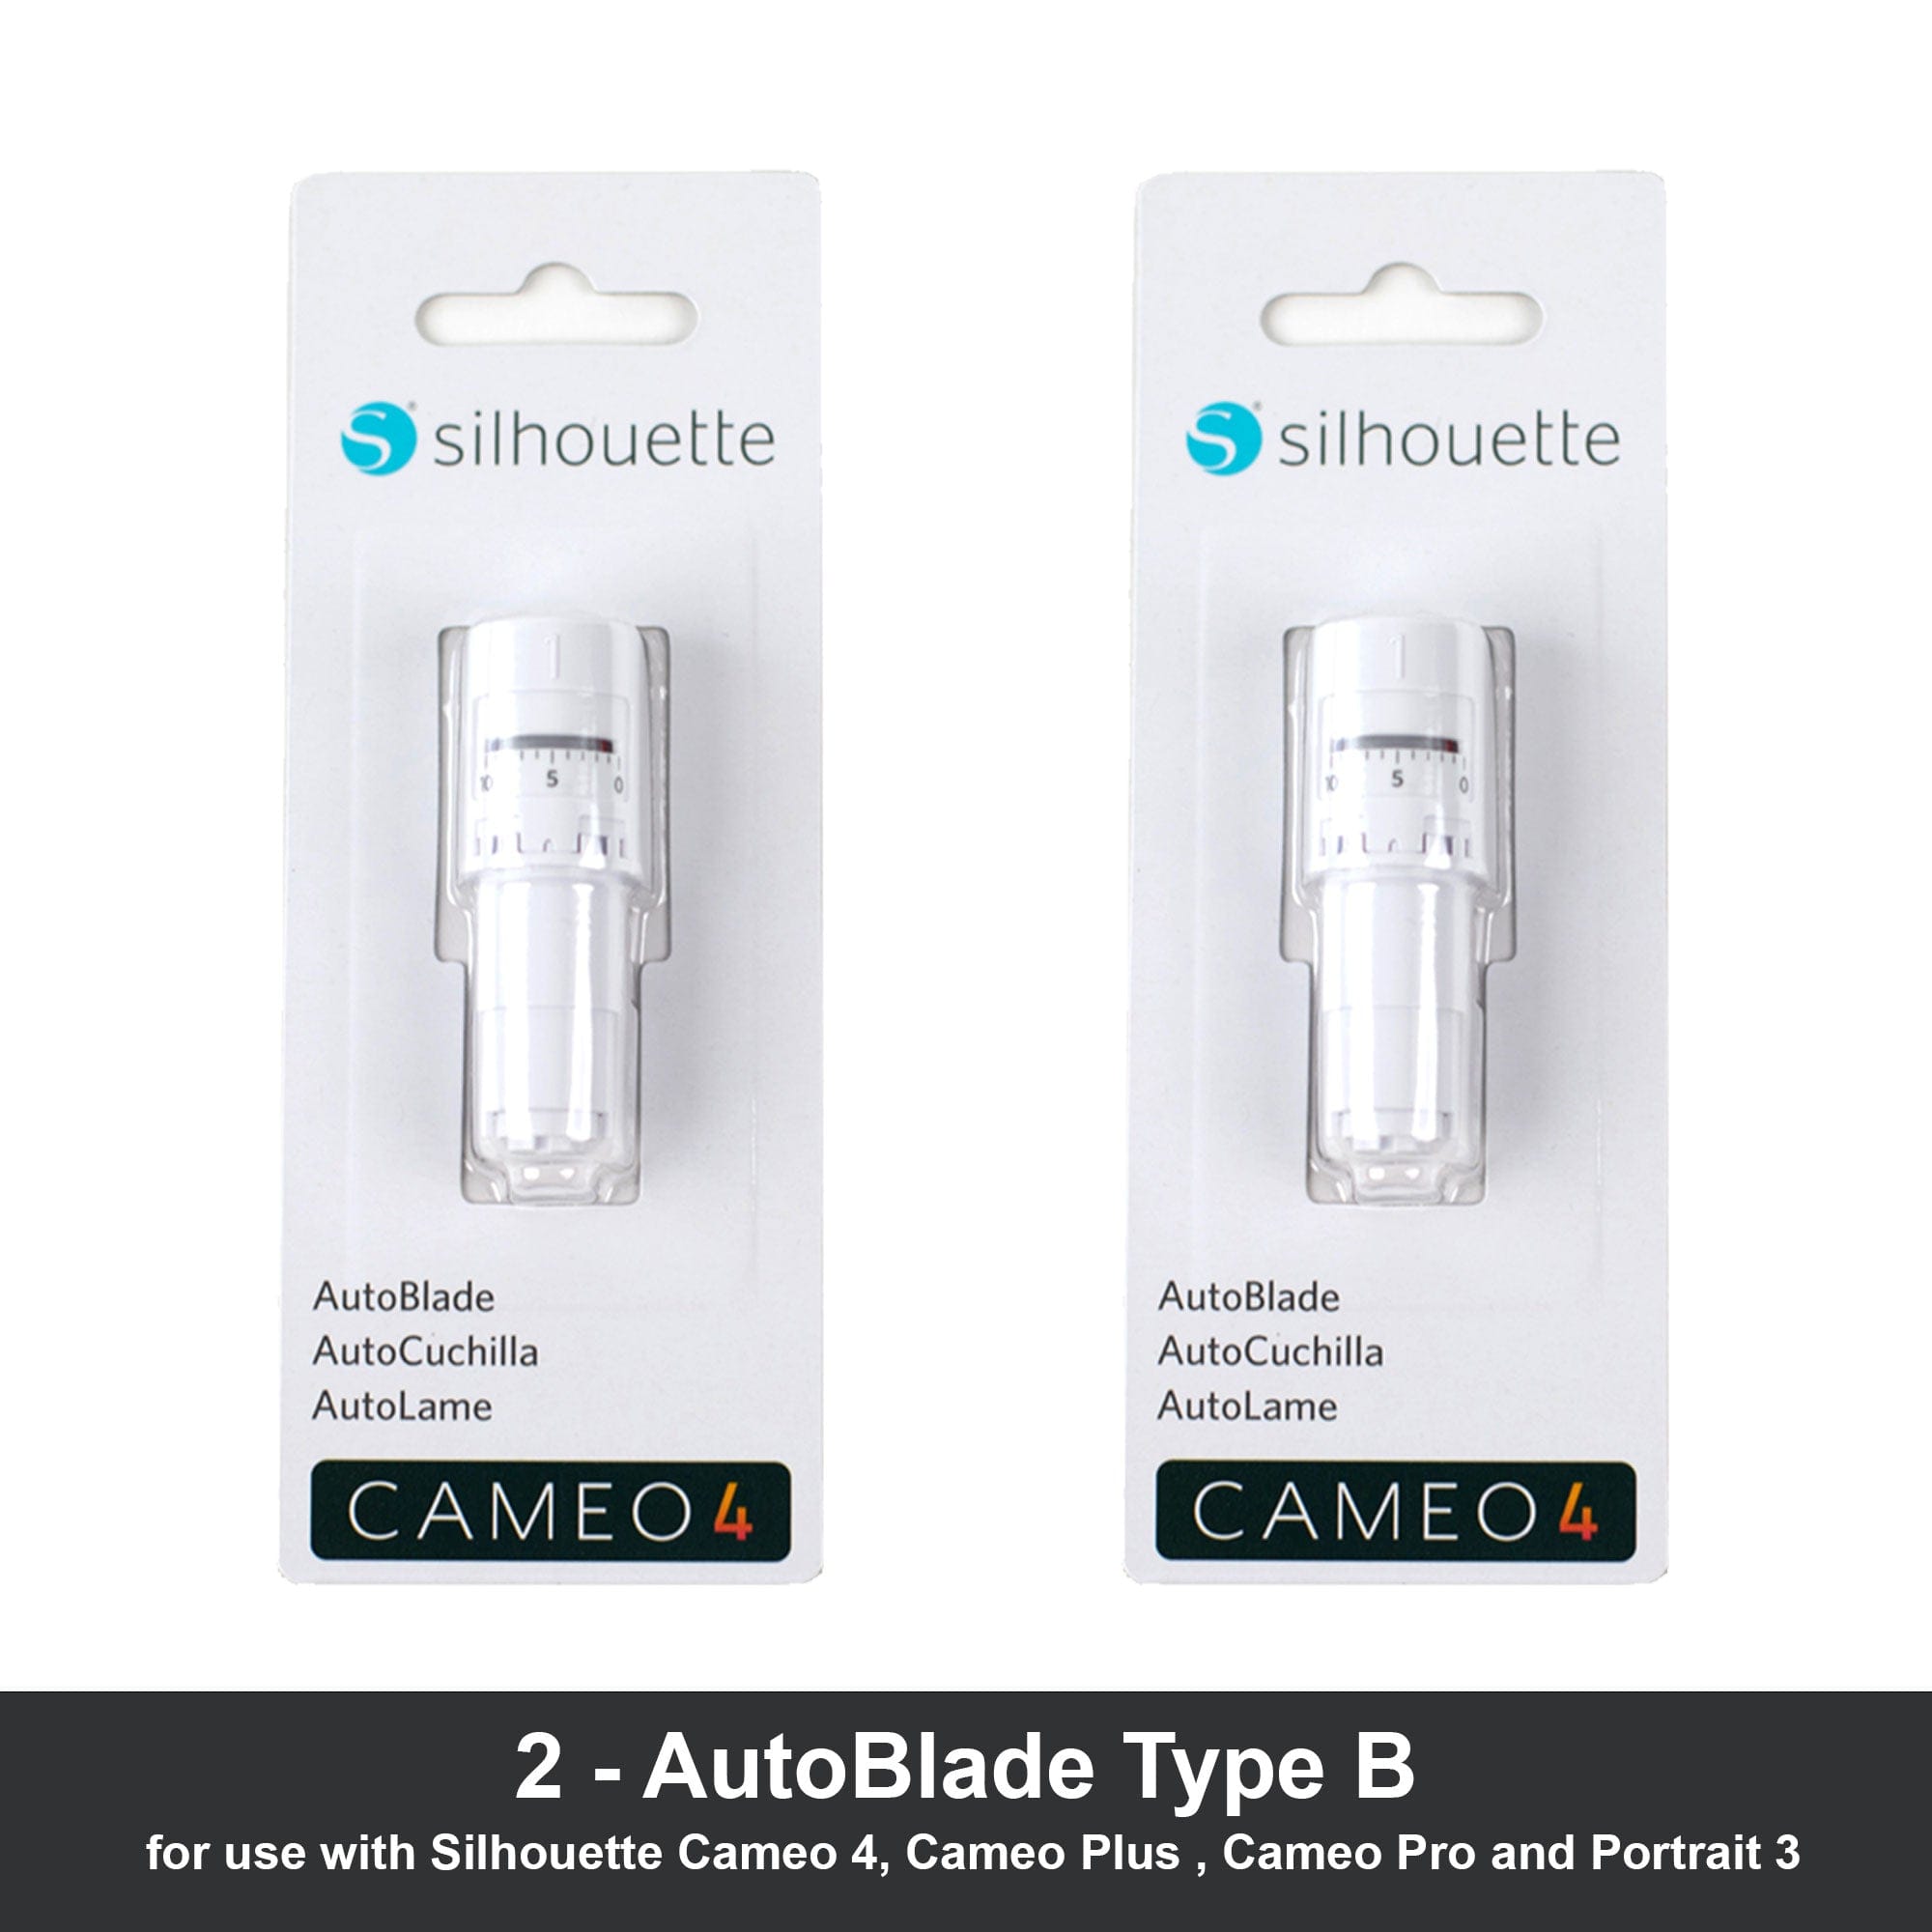 Silhouette America Blades & Cutting Mats Silhouette Cameo 4 Autoblade and Mat 2 Pack includes: (2) 12 inch Standard Mat, (2) AutoBlade 2 for Use with the CAMEO 4 and 50 Free Bonus Designs